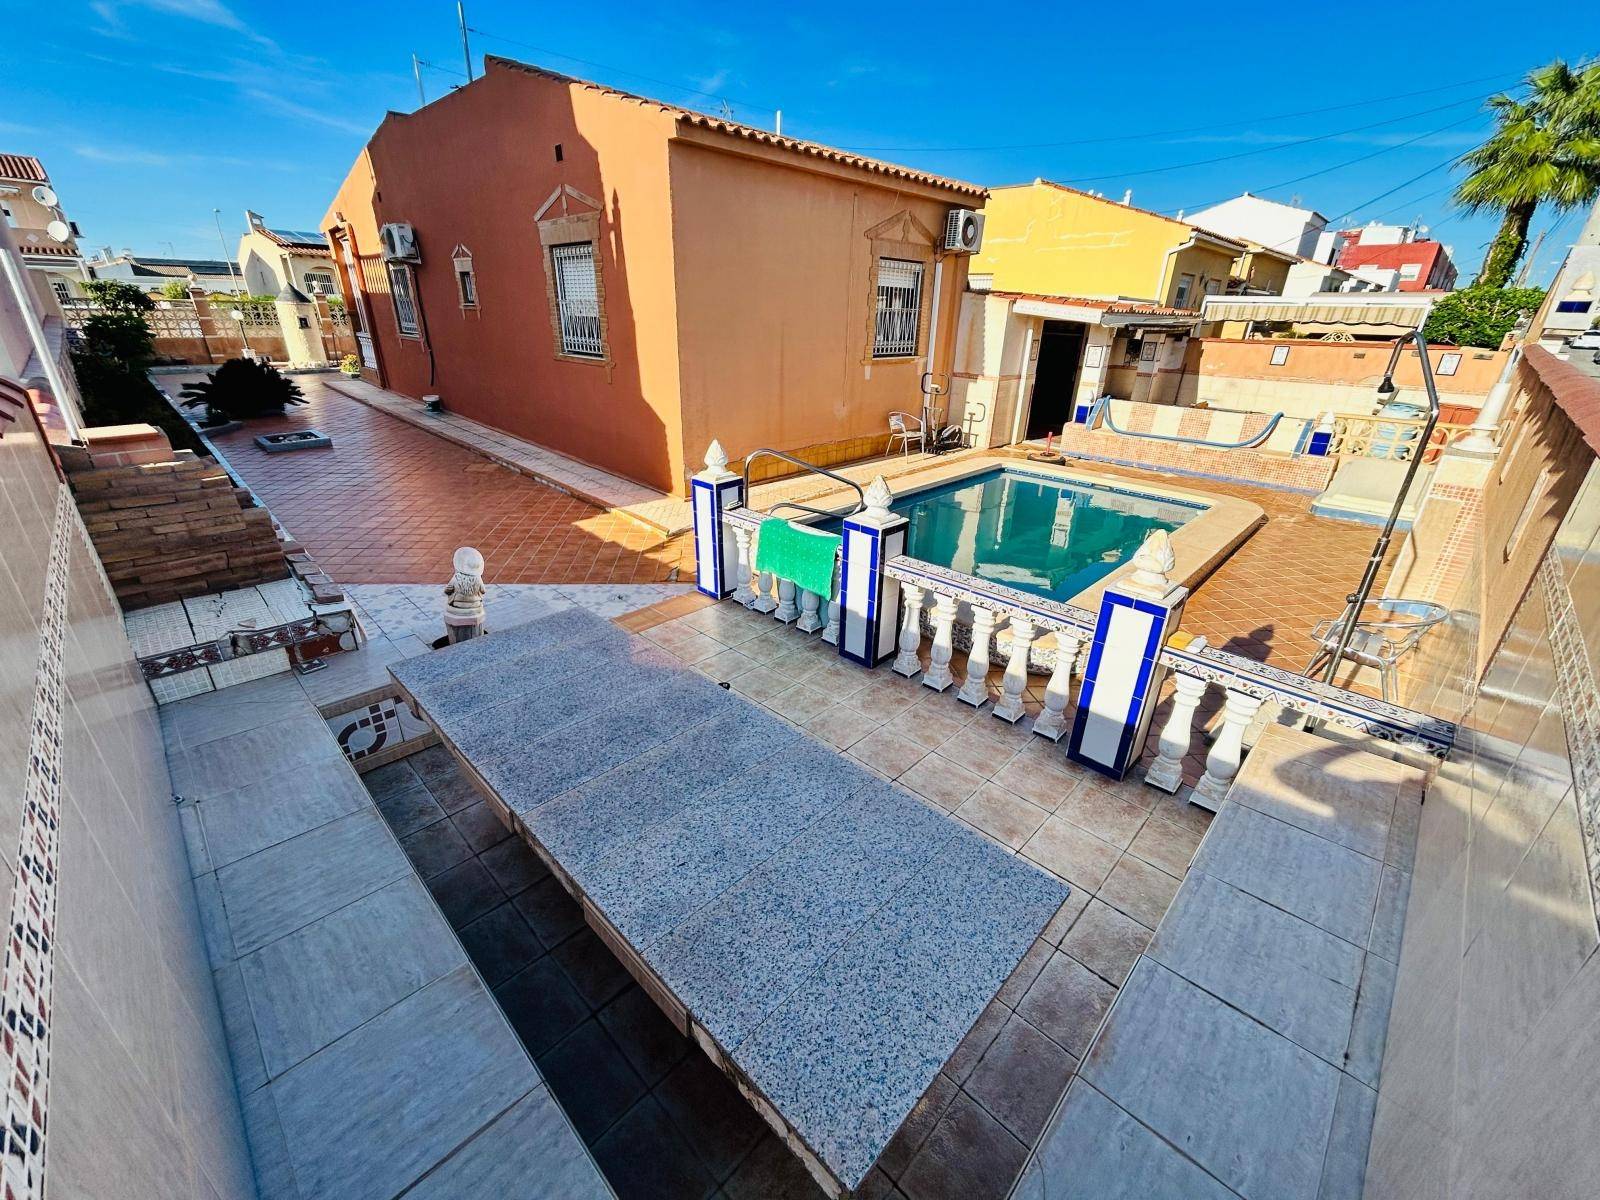 COSY DETACHED VILLA IN SAN LUIS WITH POOL AND RENOVATION POTENTIAL